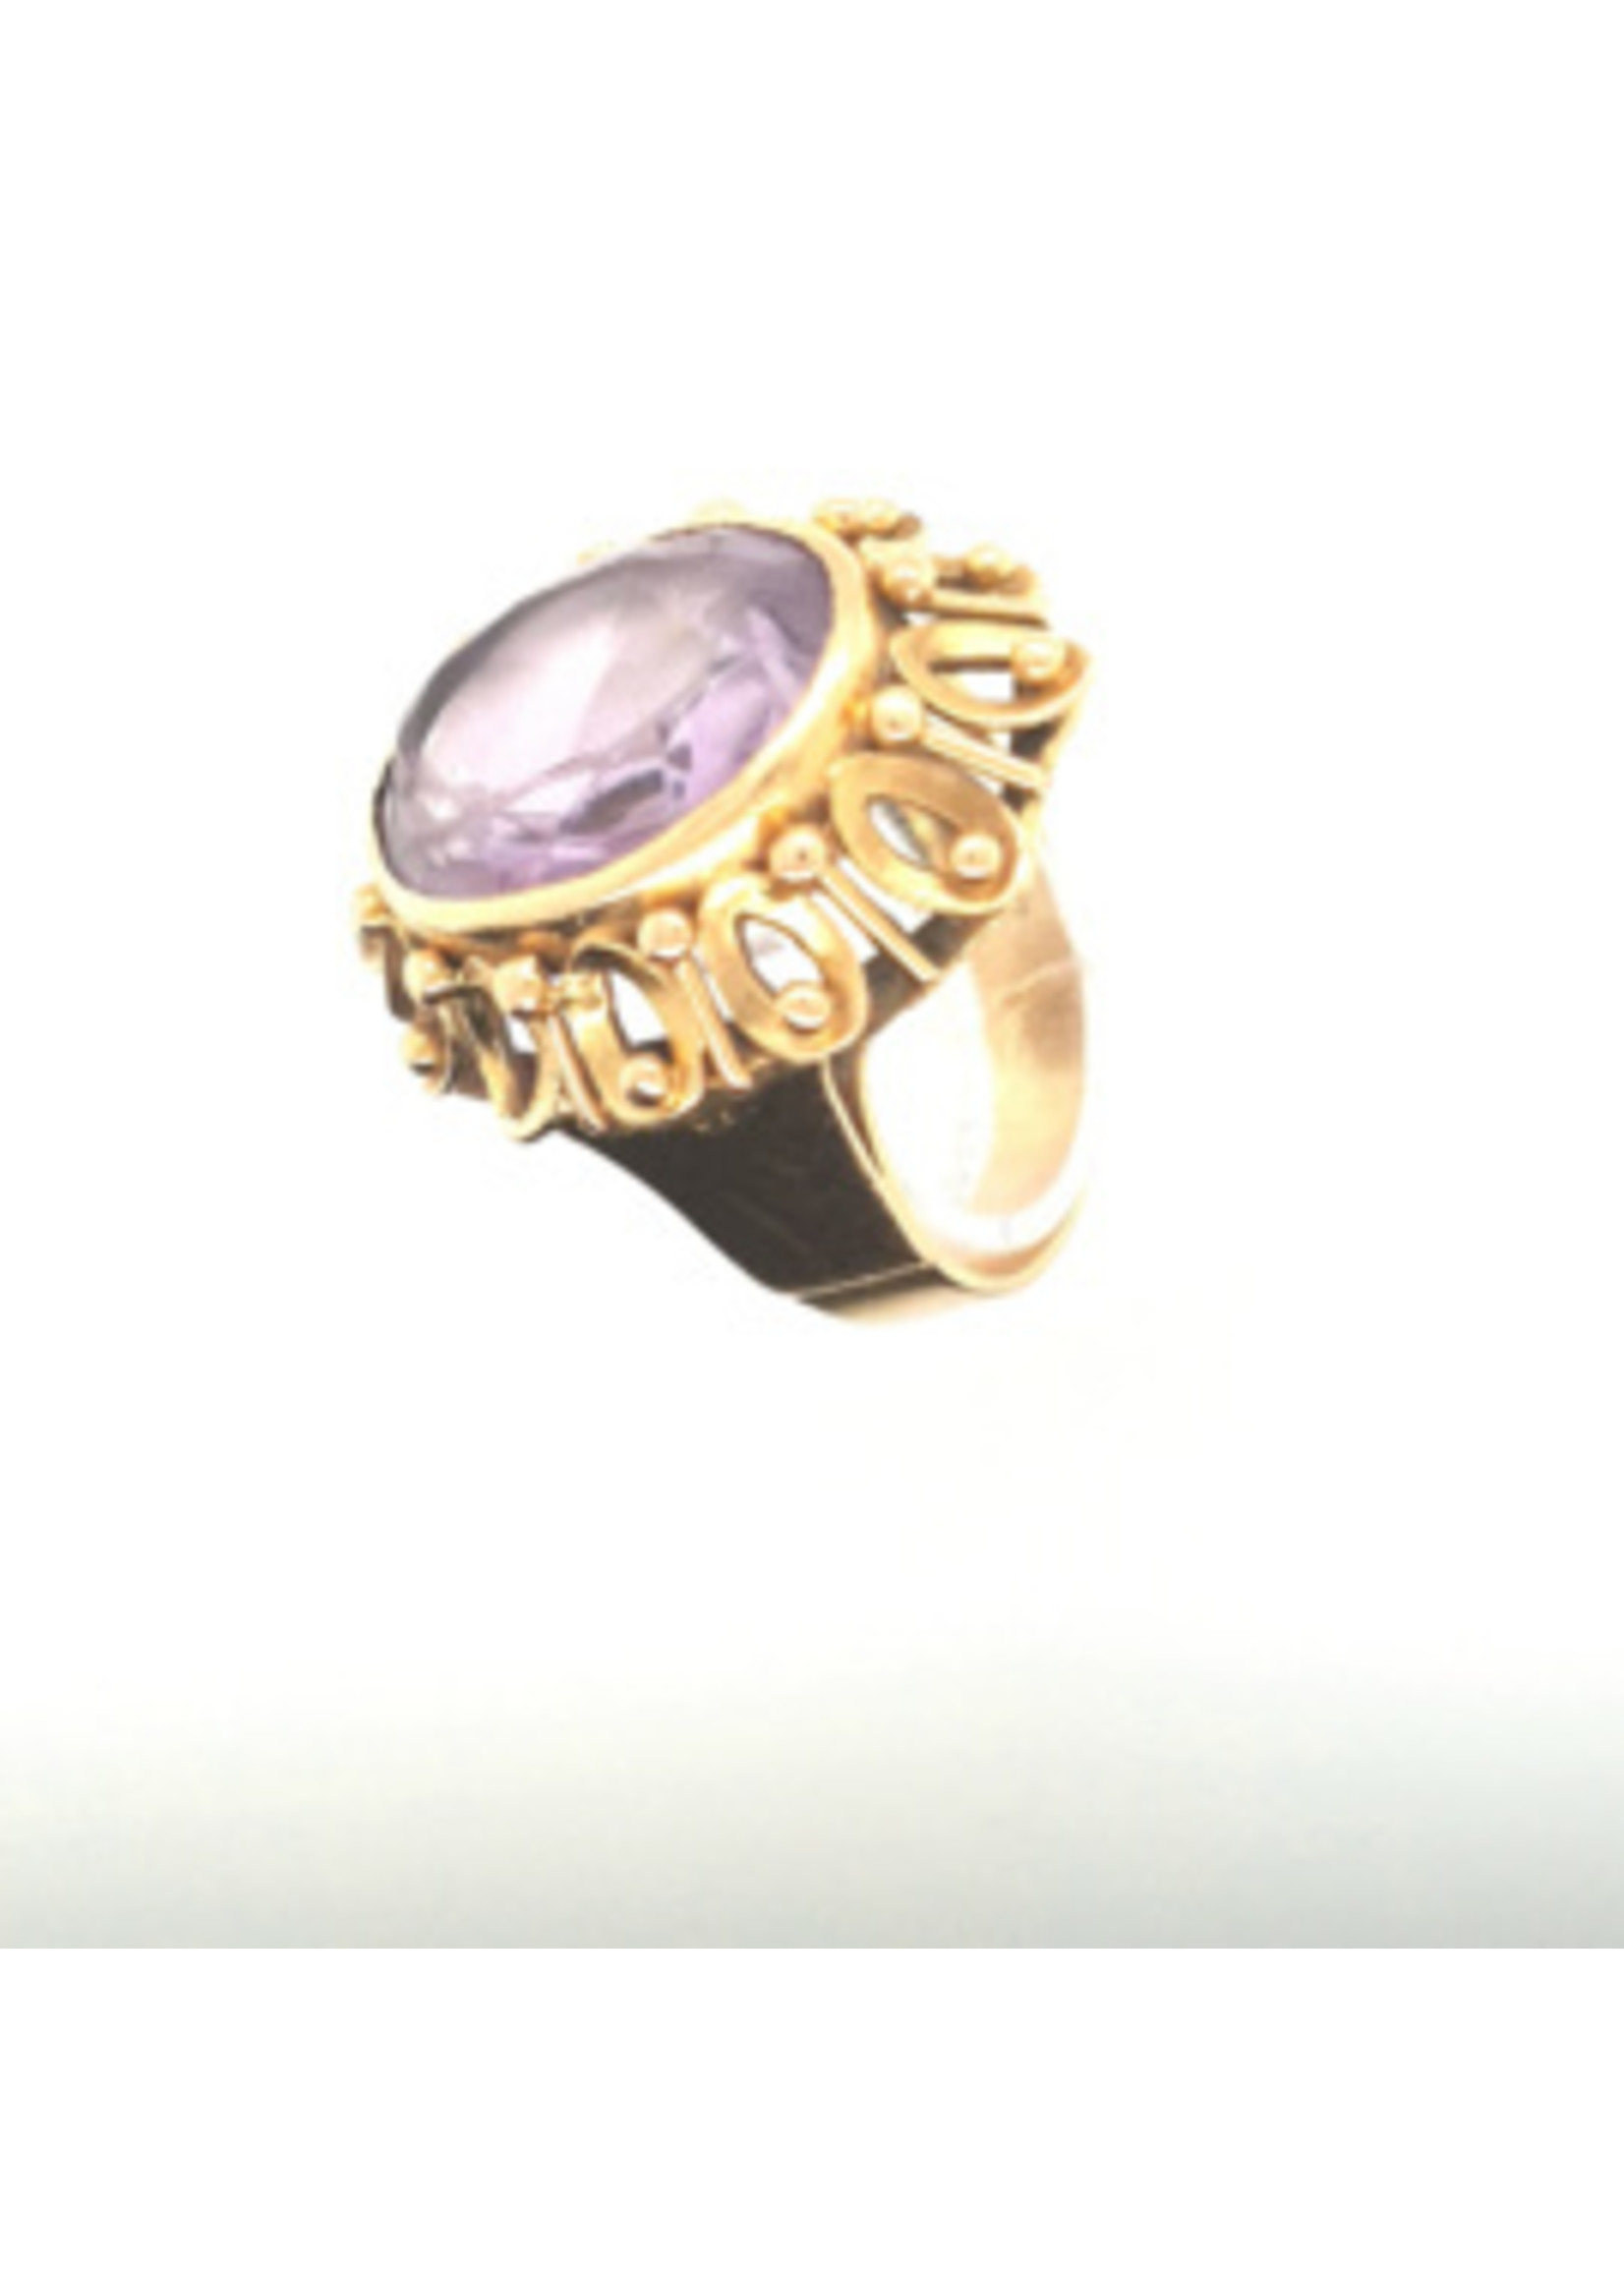 Vintage & Occasion Occasion gouden ring met paarse synthetische steen